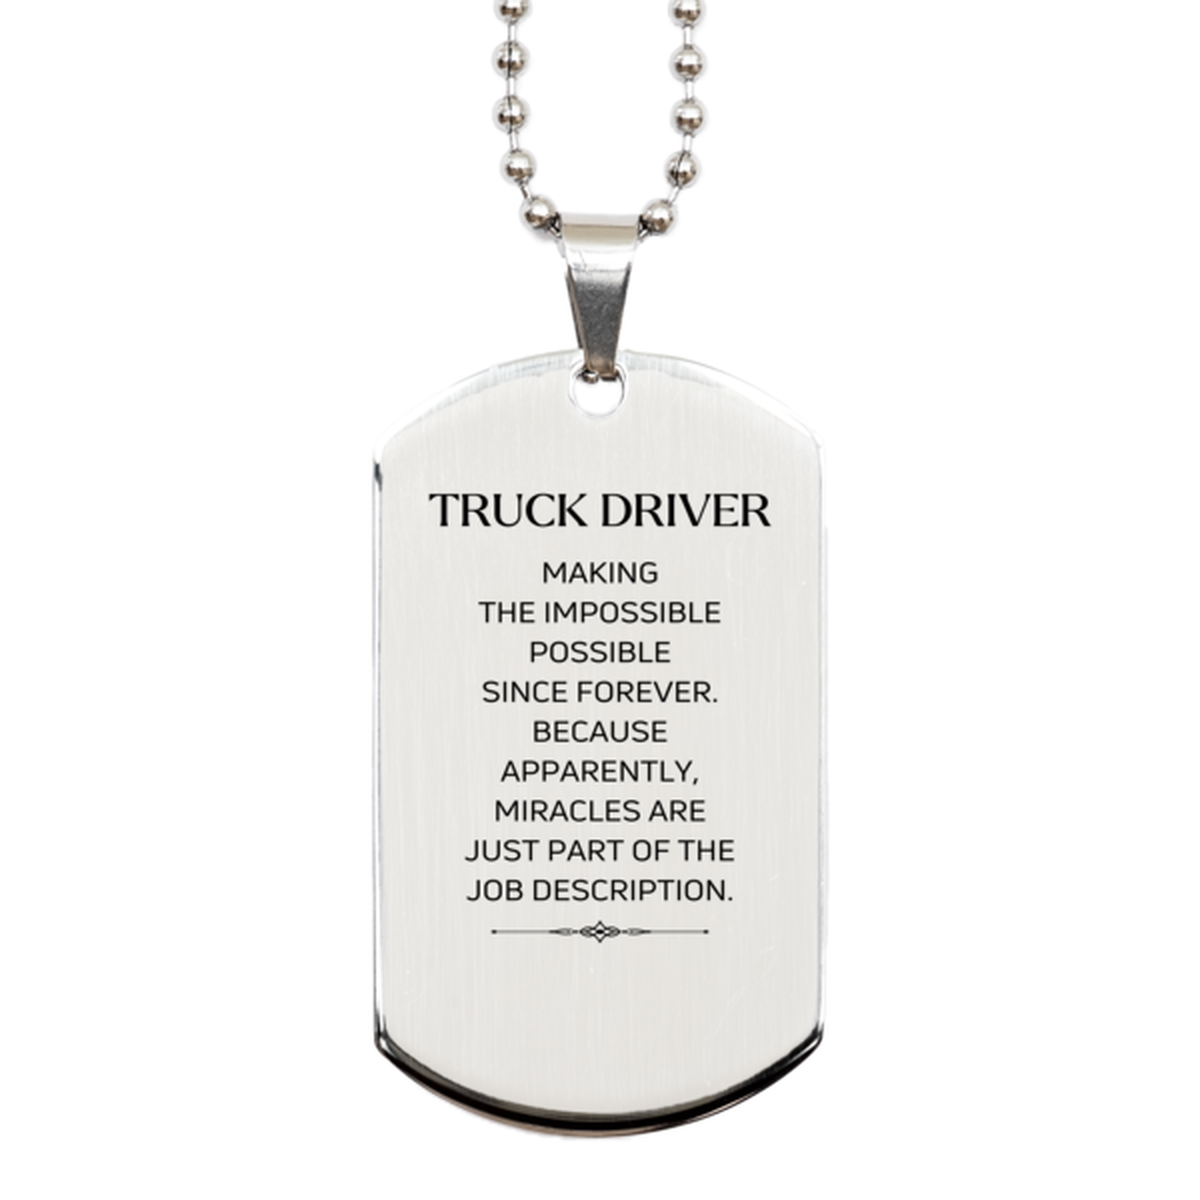 Funny Truck Driver Gifts, Miracles are just part of the job description, Inspirational Birthday Silver Dog Tag For Truck Driver, Men, Women, Coworkers, Friends, Boss